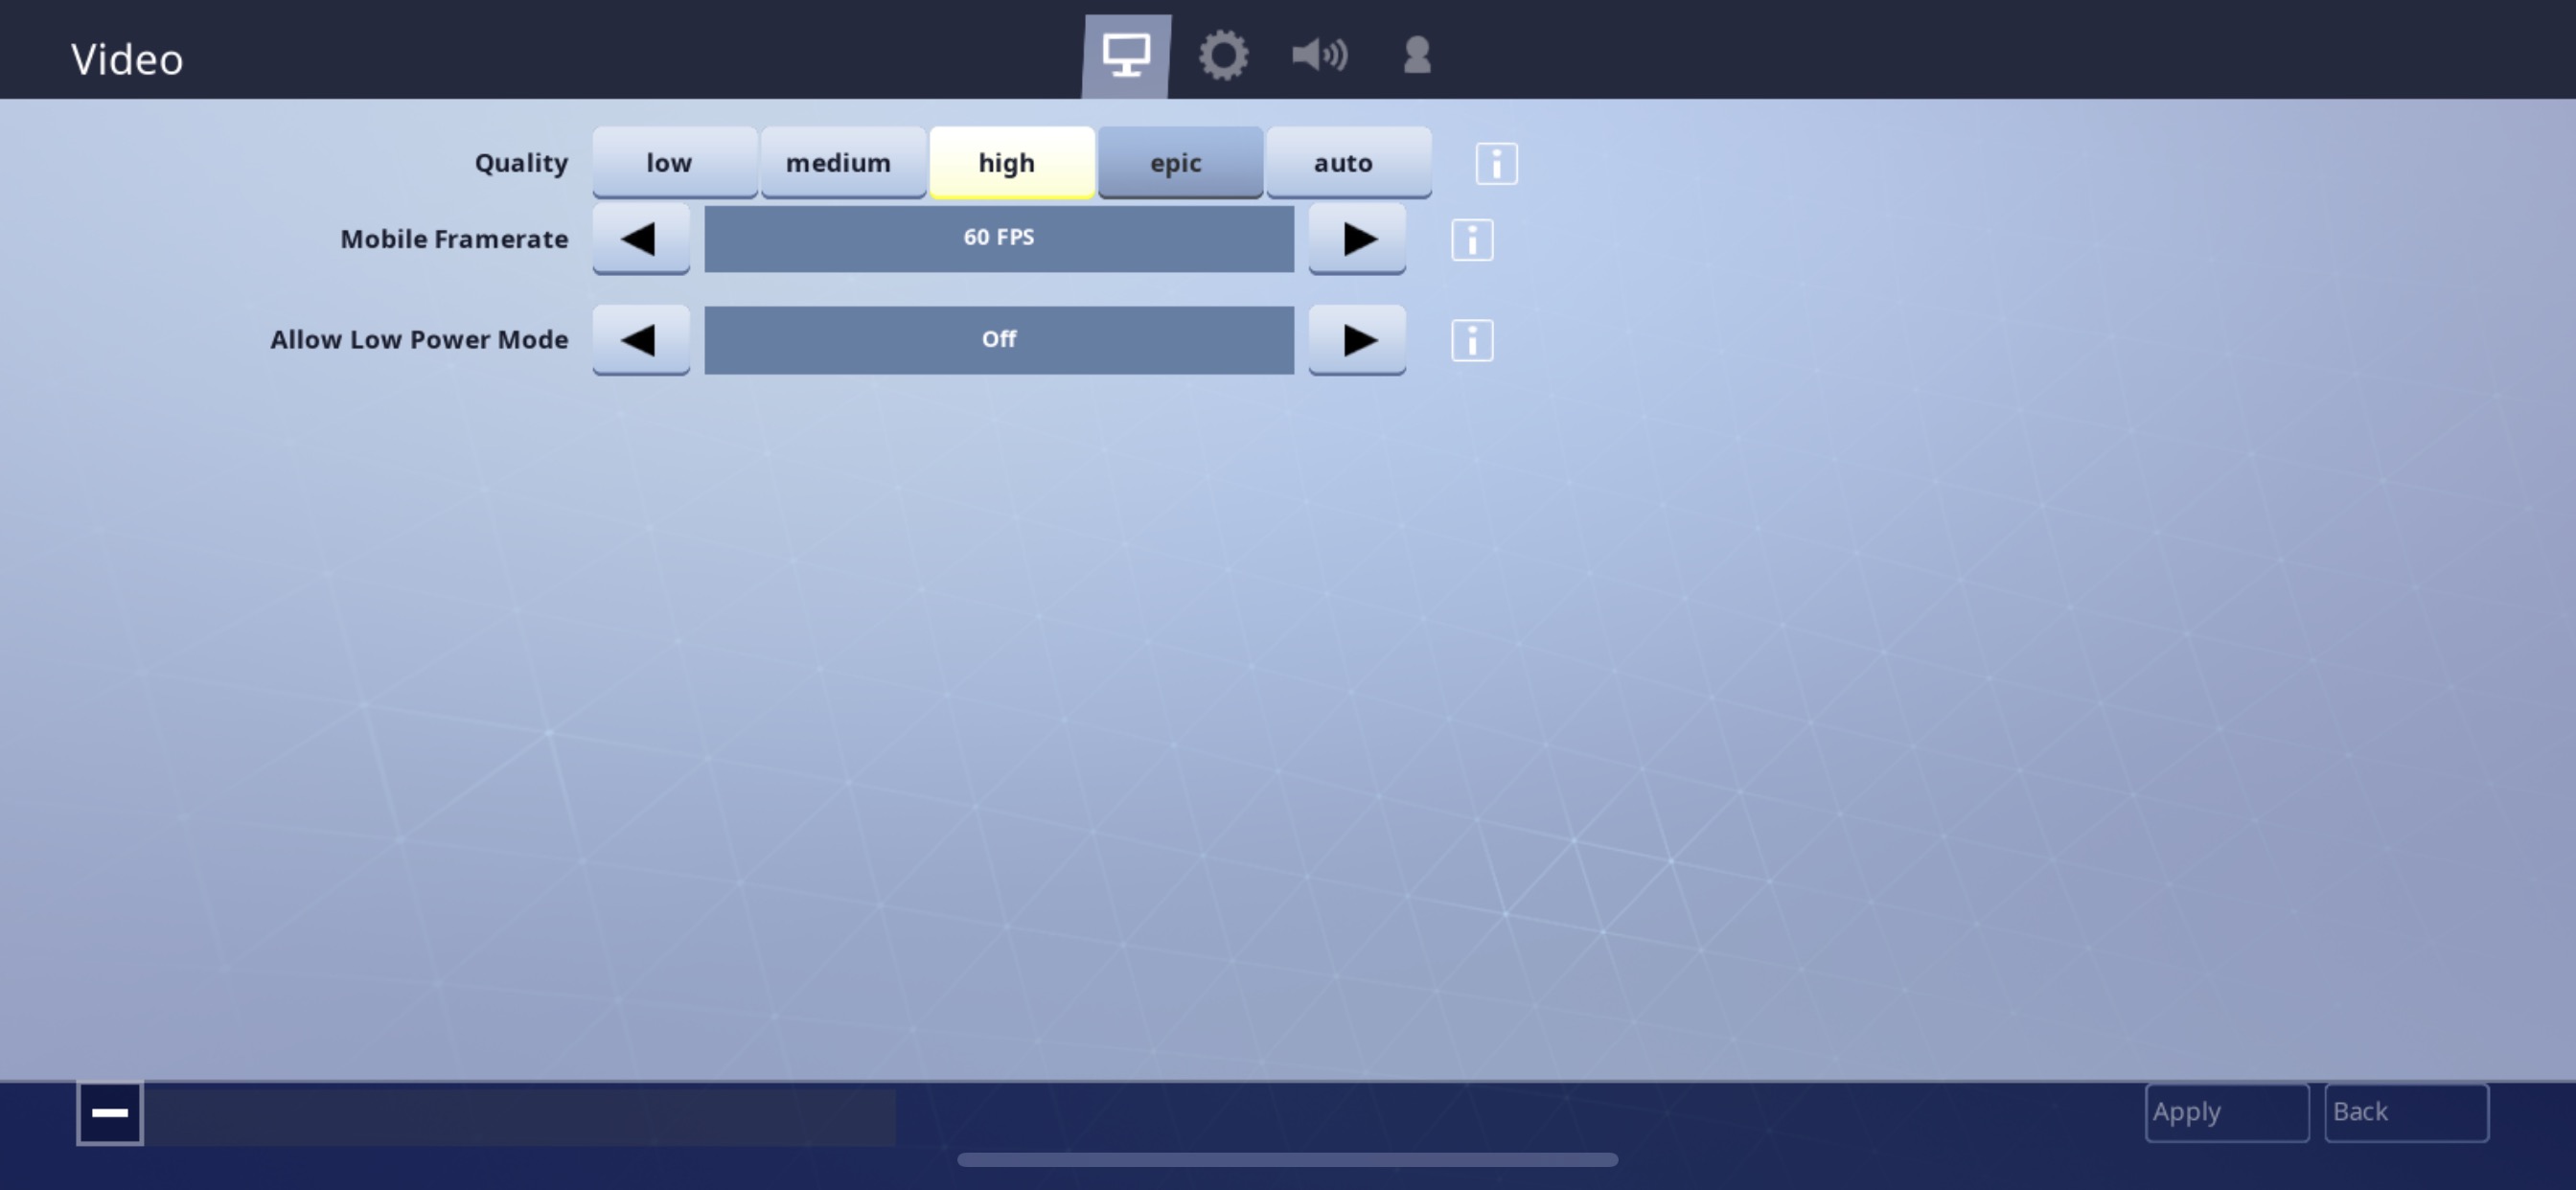 Fortnite 60fps Gameplay Coming To Ipad Pro In Next Patch Android - certain ipad pro models will get 60fps support in the next patch this patch will likely arrive when season 7 begins read about what we know about season 7